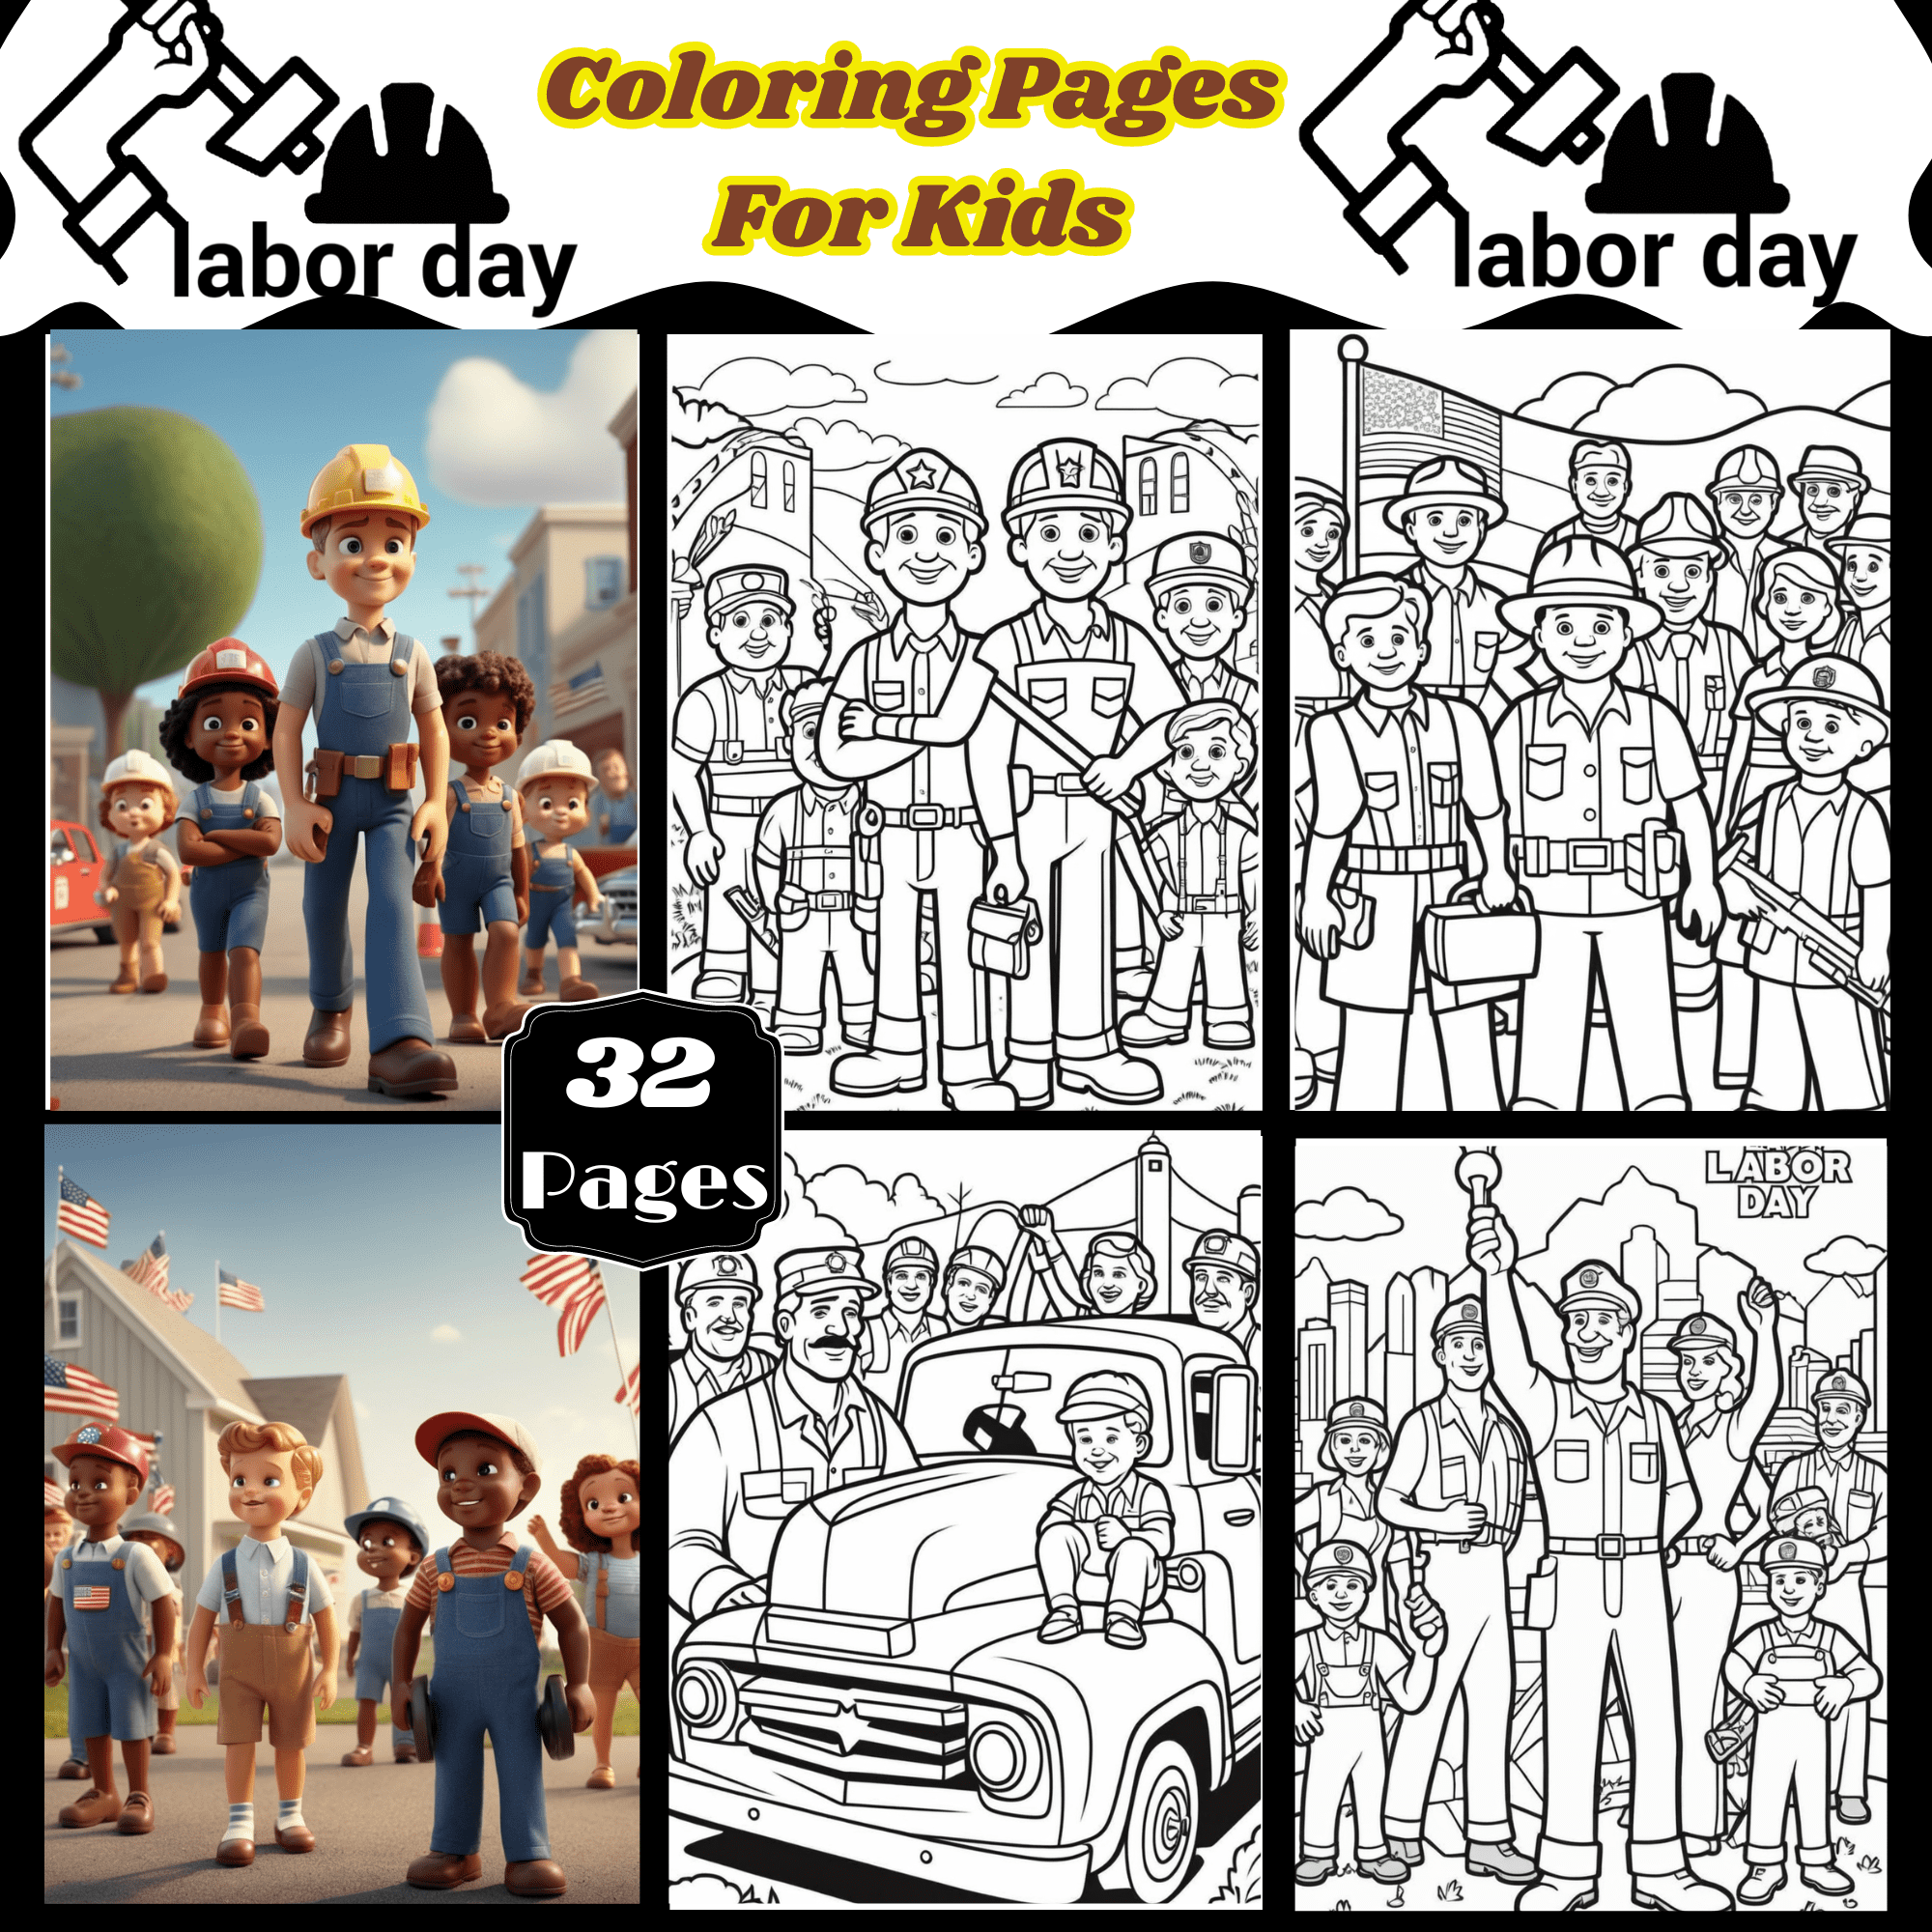 Labor day coloring pages for kids